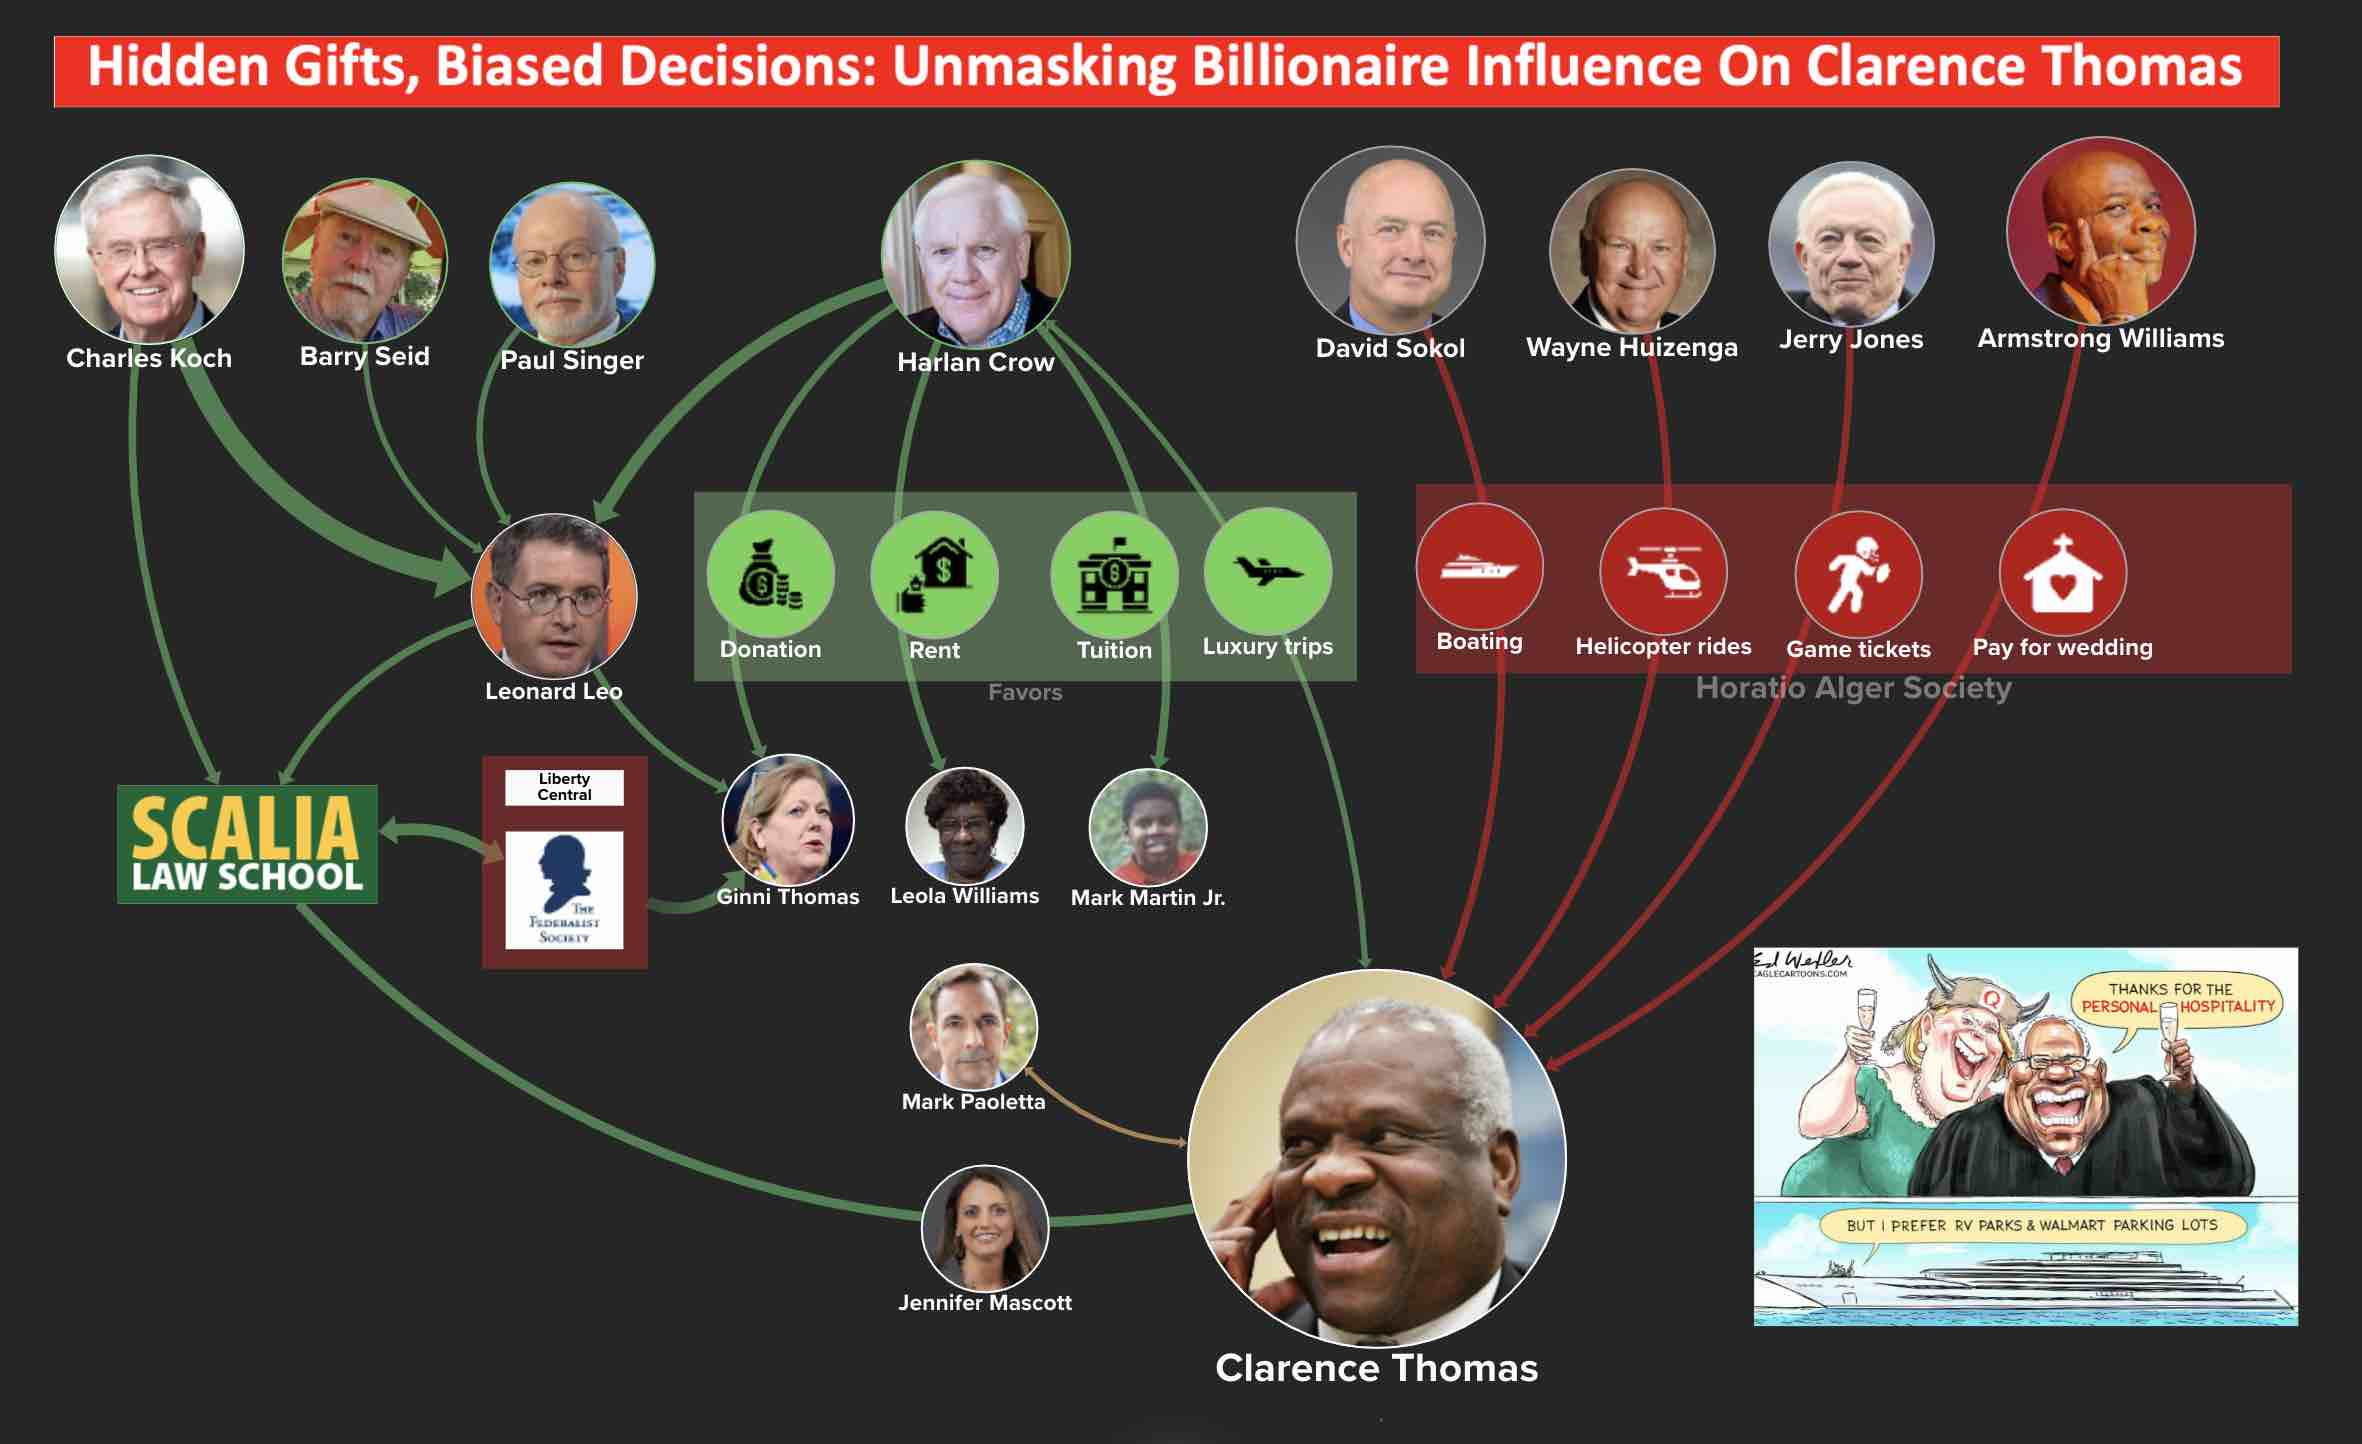 Hidden Gifts, Biased Decisions: Unmasking Billionaire Influence On Clarence Thomas